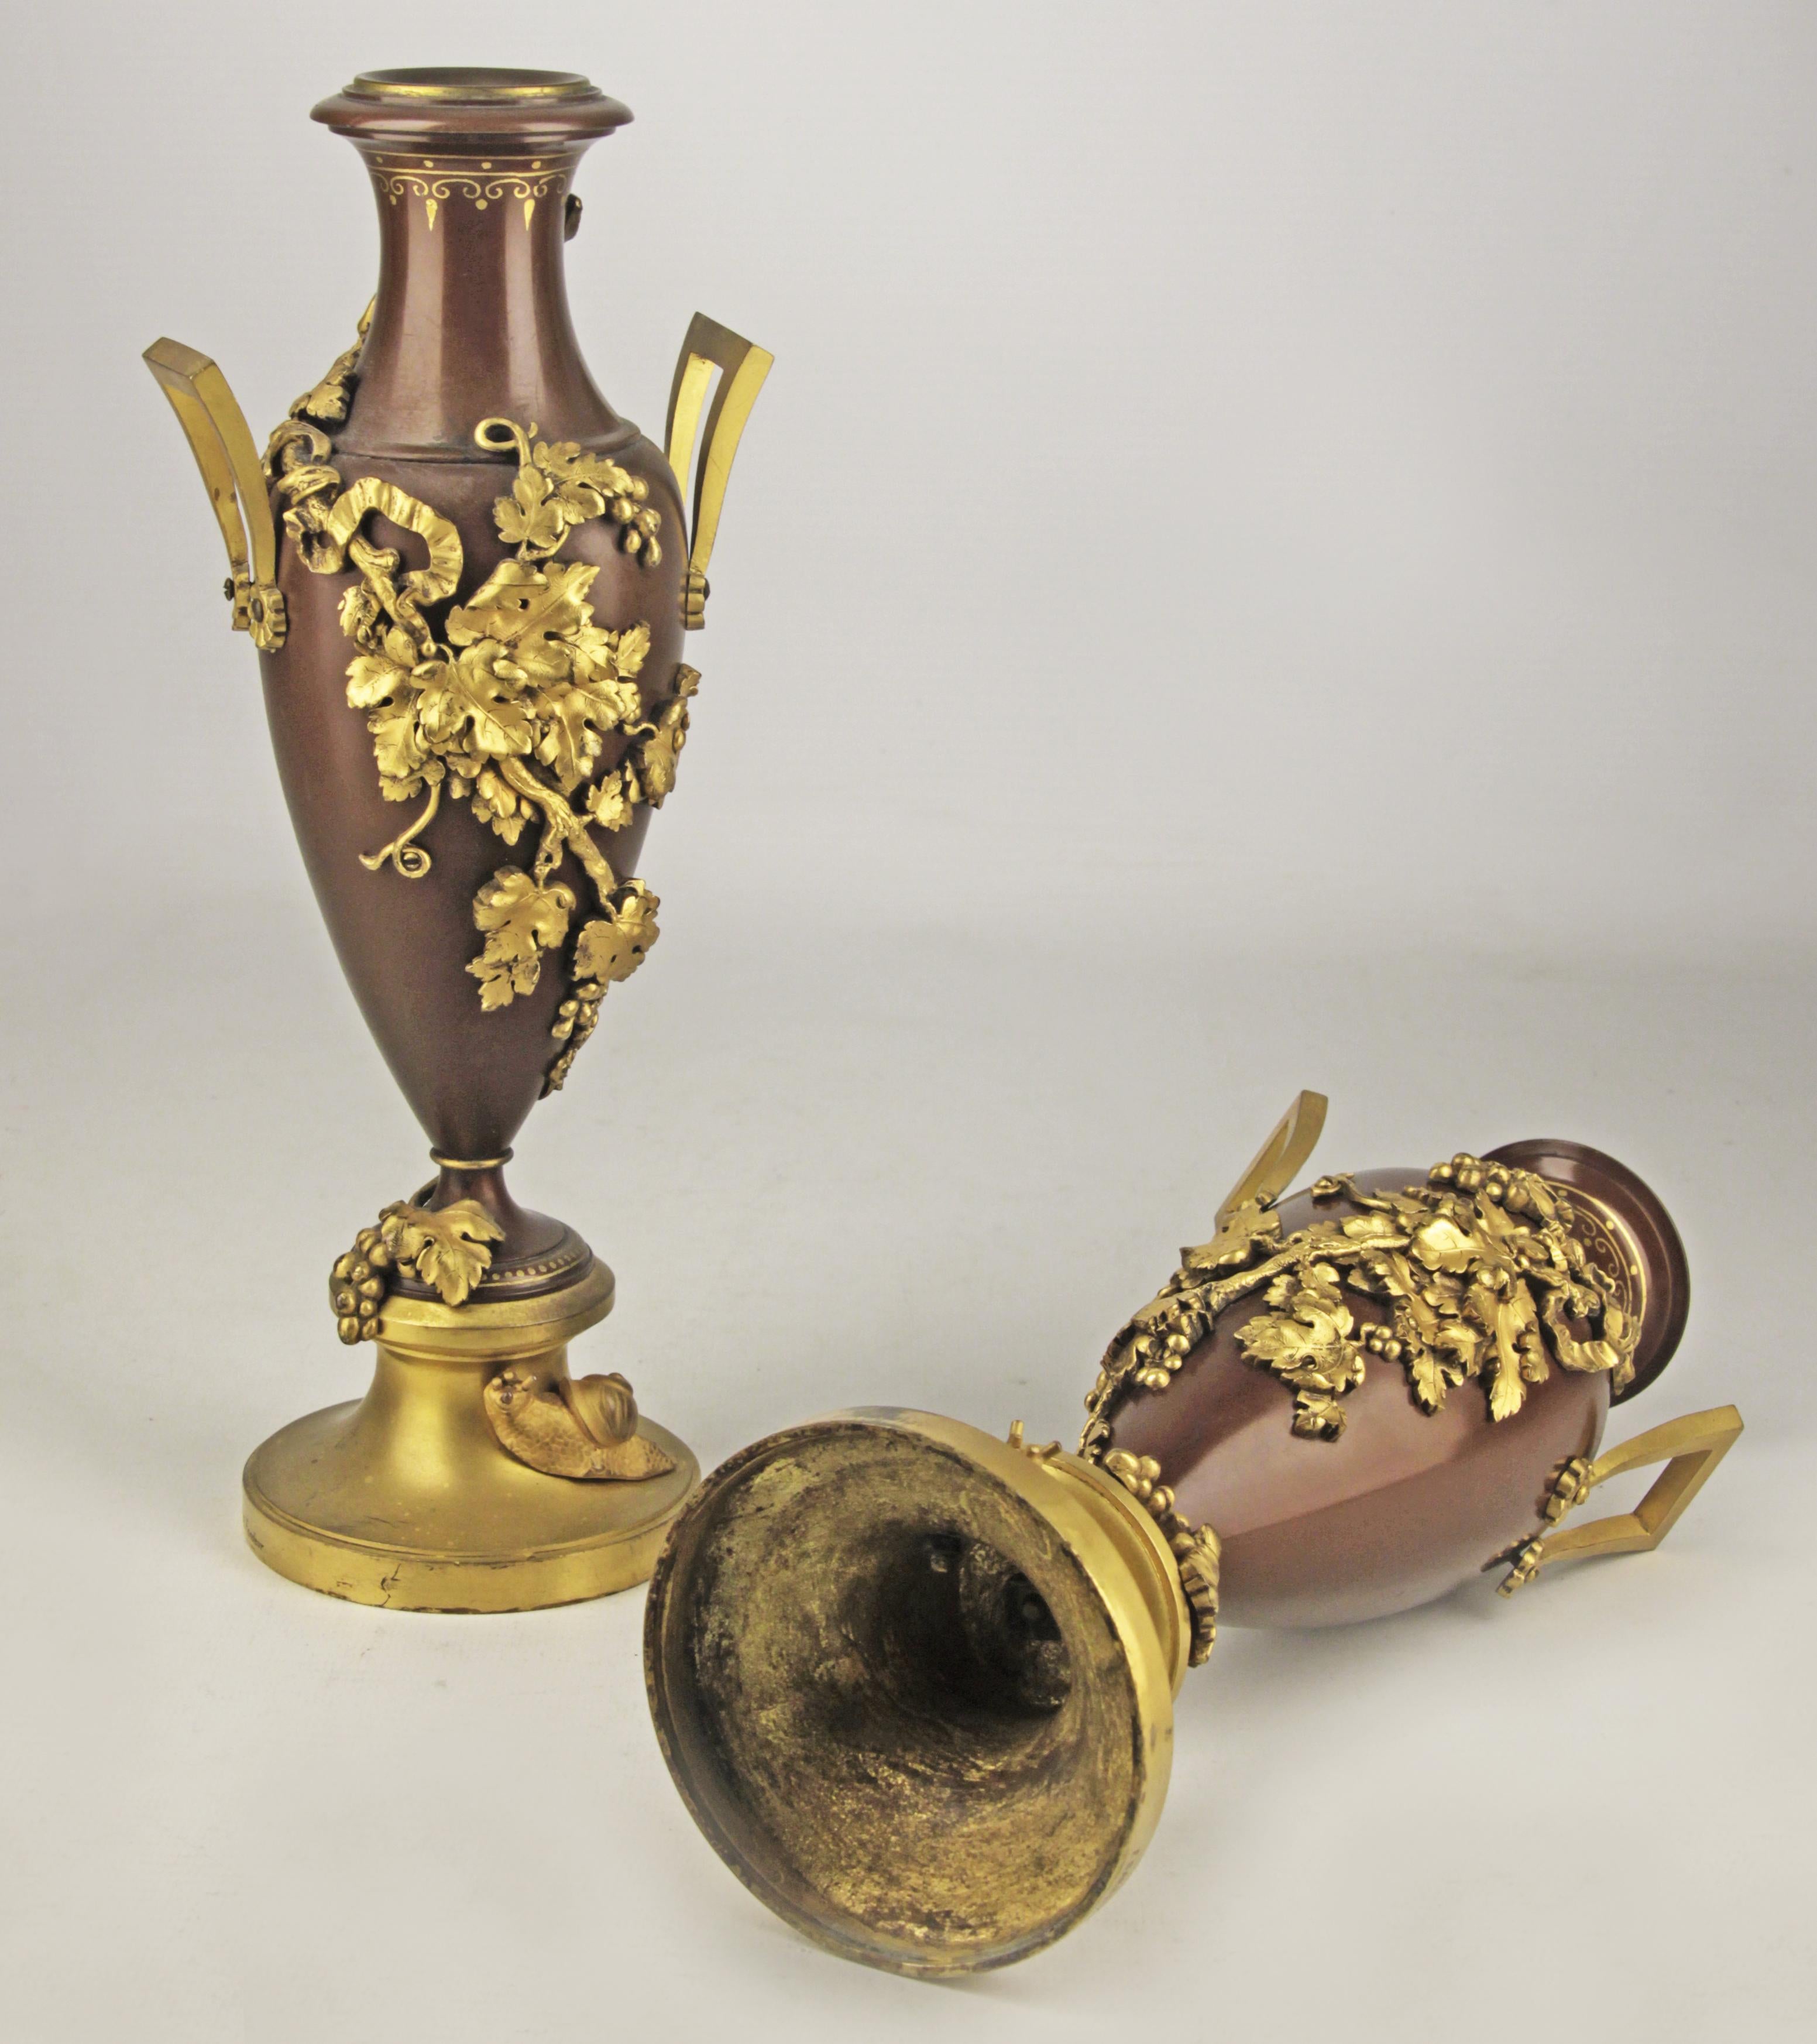 Pair of 19th century/2nd Empire bronze decorative amphorae by Ferdinand Barbedienne

By: Ferdinand Barbedienne
Material: bronze, metal, copper
Technique: forged, gilt, metalwork, molded, patinated, cast
Dimensions: 4 in x 10 in
Date: late 19th